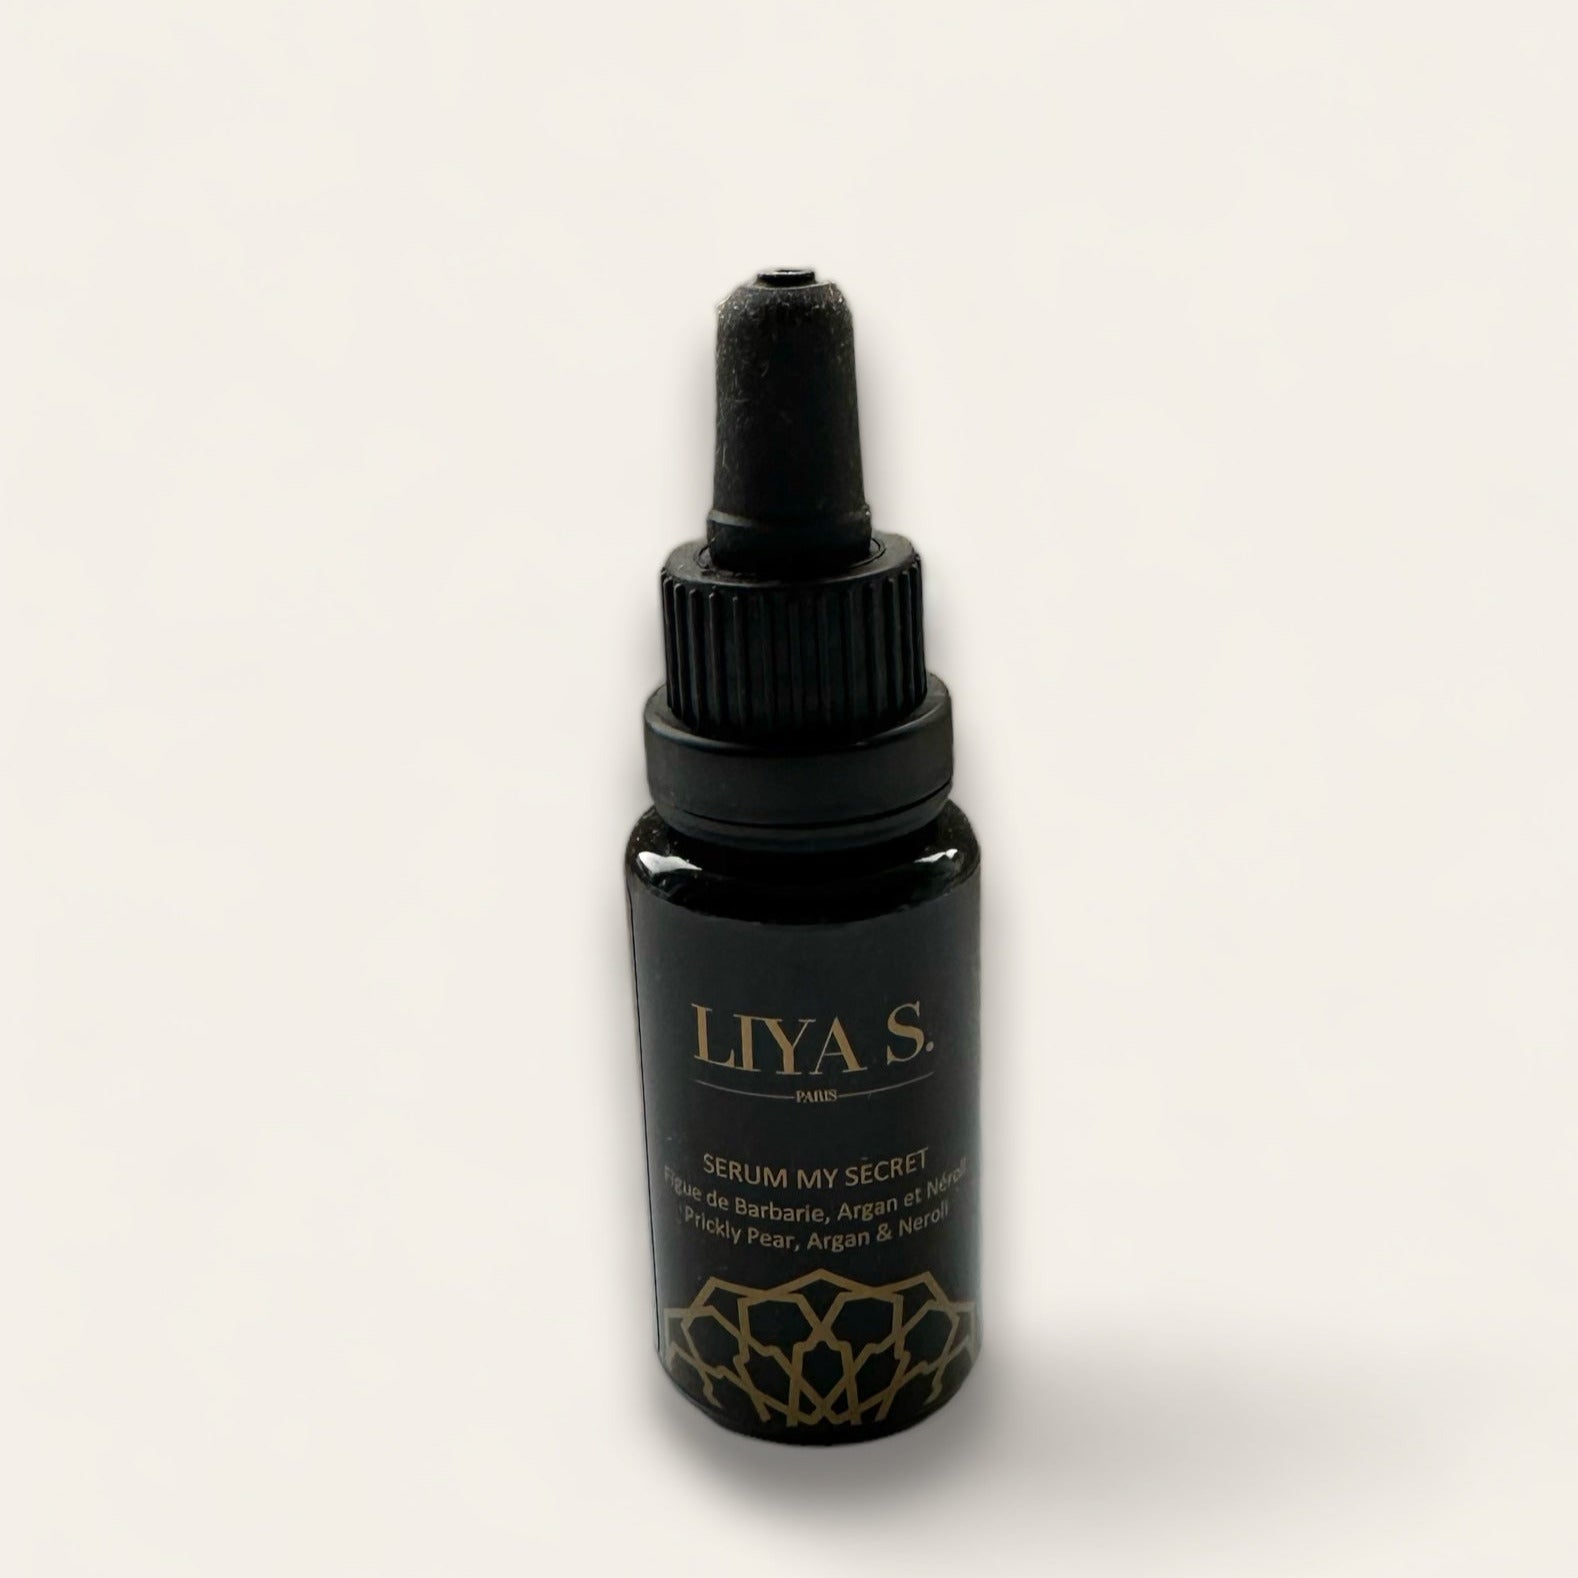 NEW: SERUM made from prickly pear seed oil, argan & neroli